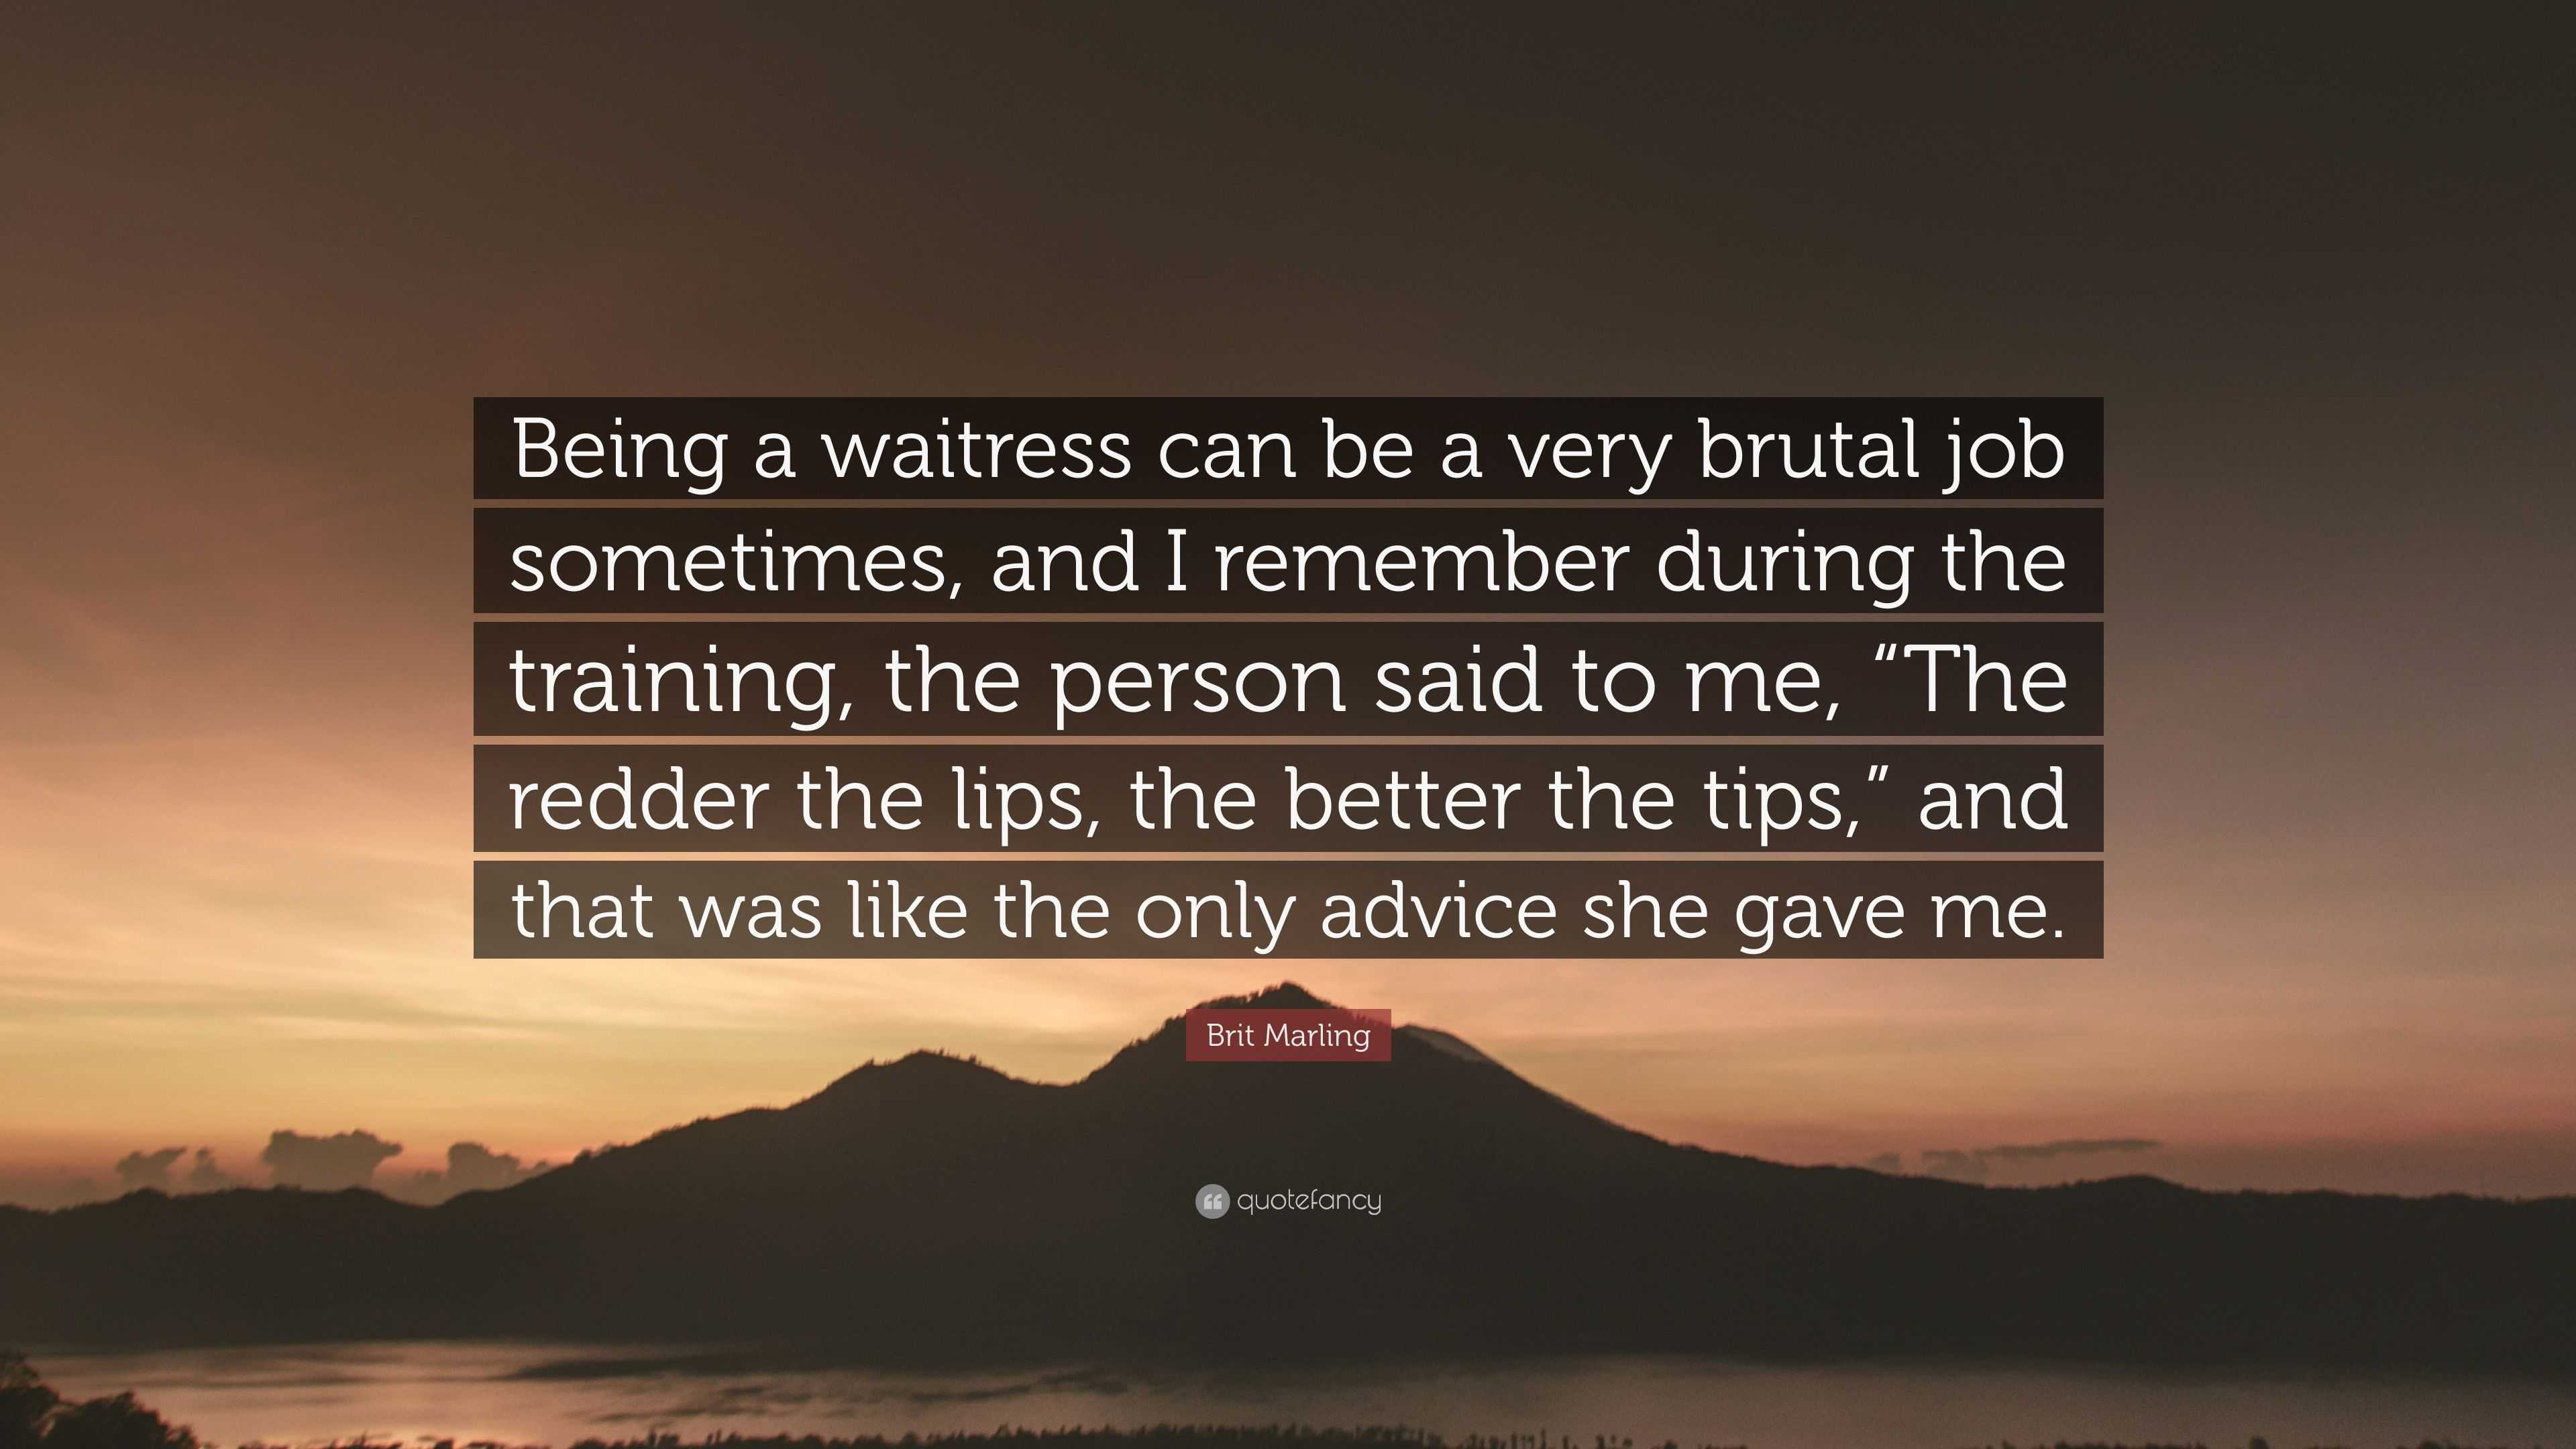 Brit Marling Quote: “Being a waitress can be a very brutal job sometimes, and remember during the training, the person said to me, “The red...”